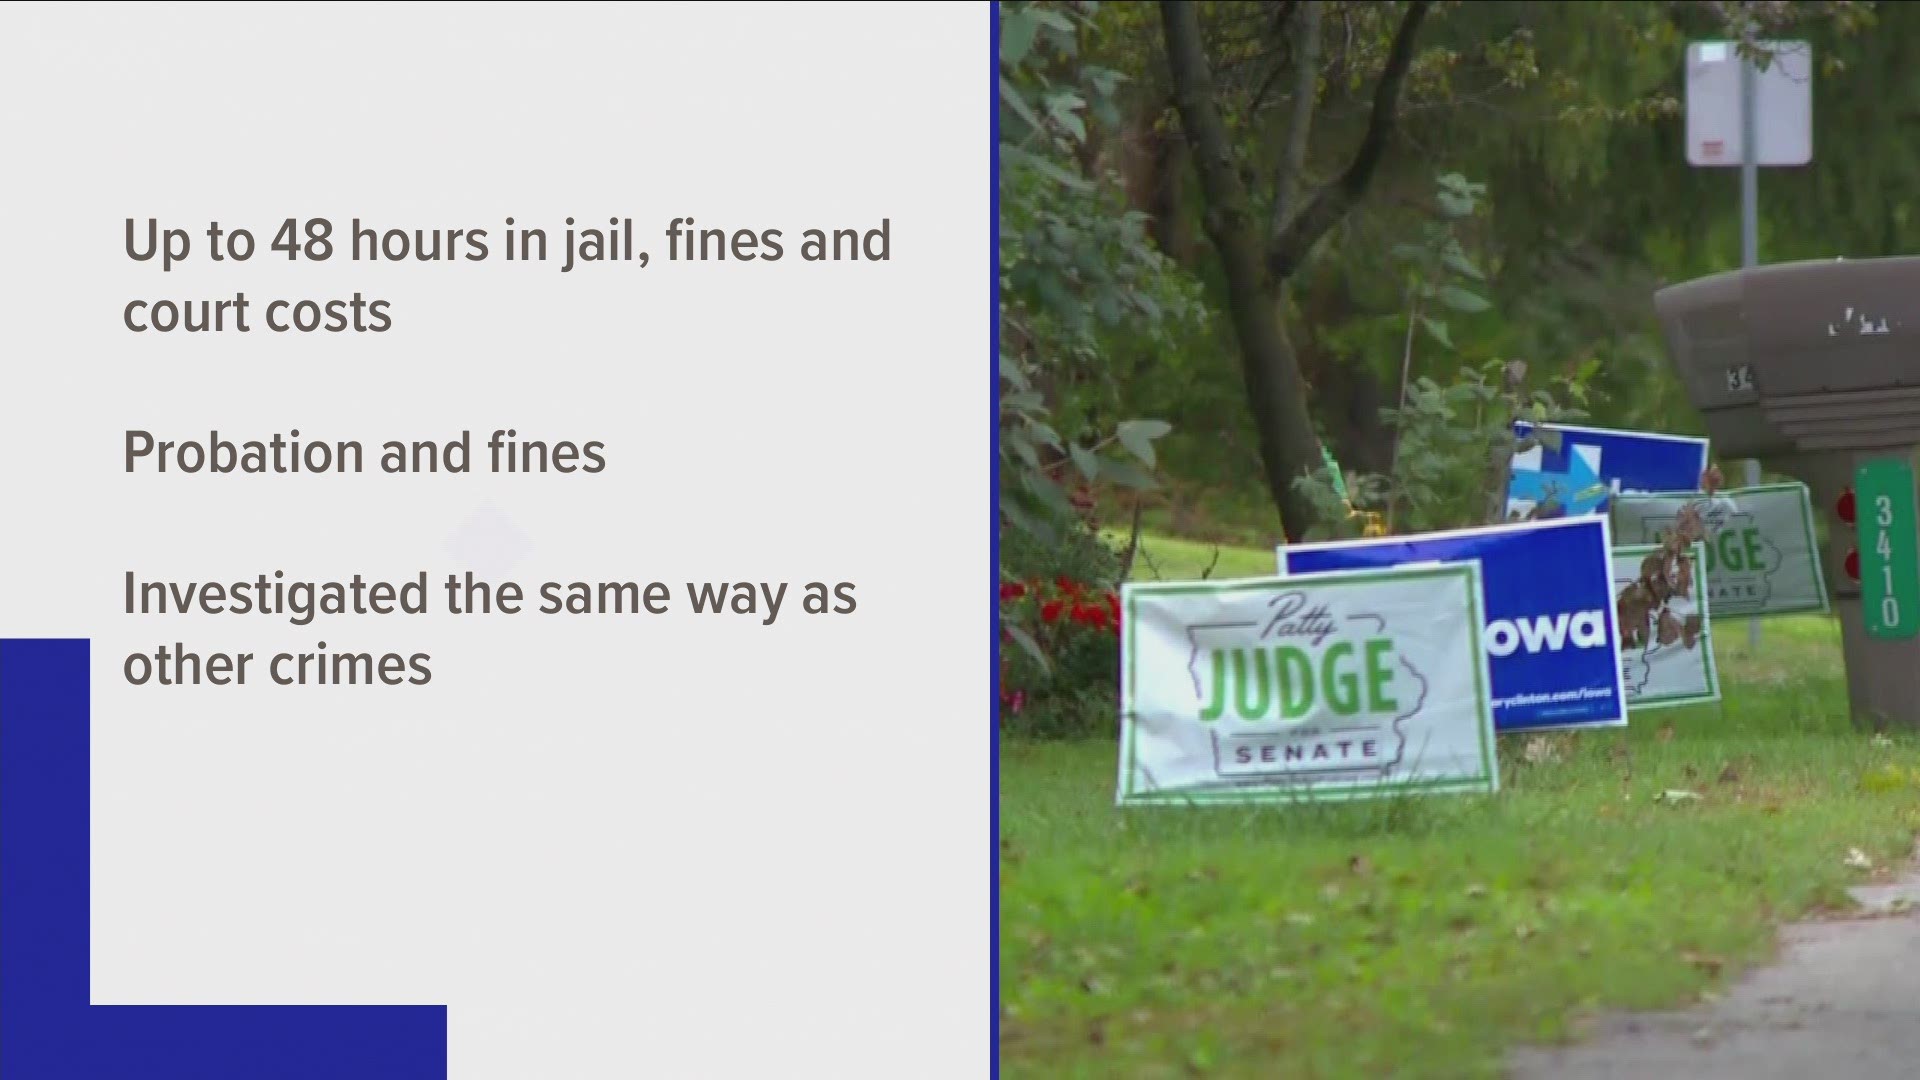 Morristown police are reminding people that stealing or vandalizing political signs can lead to fines or jail time.